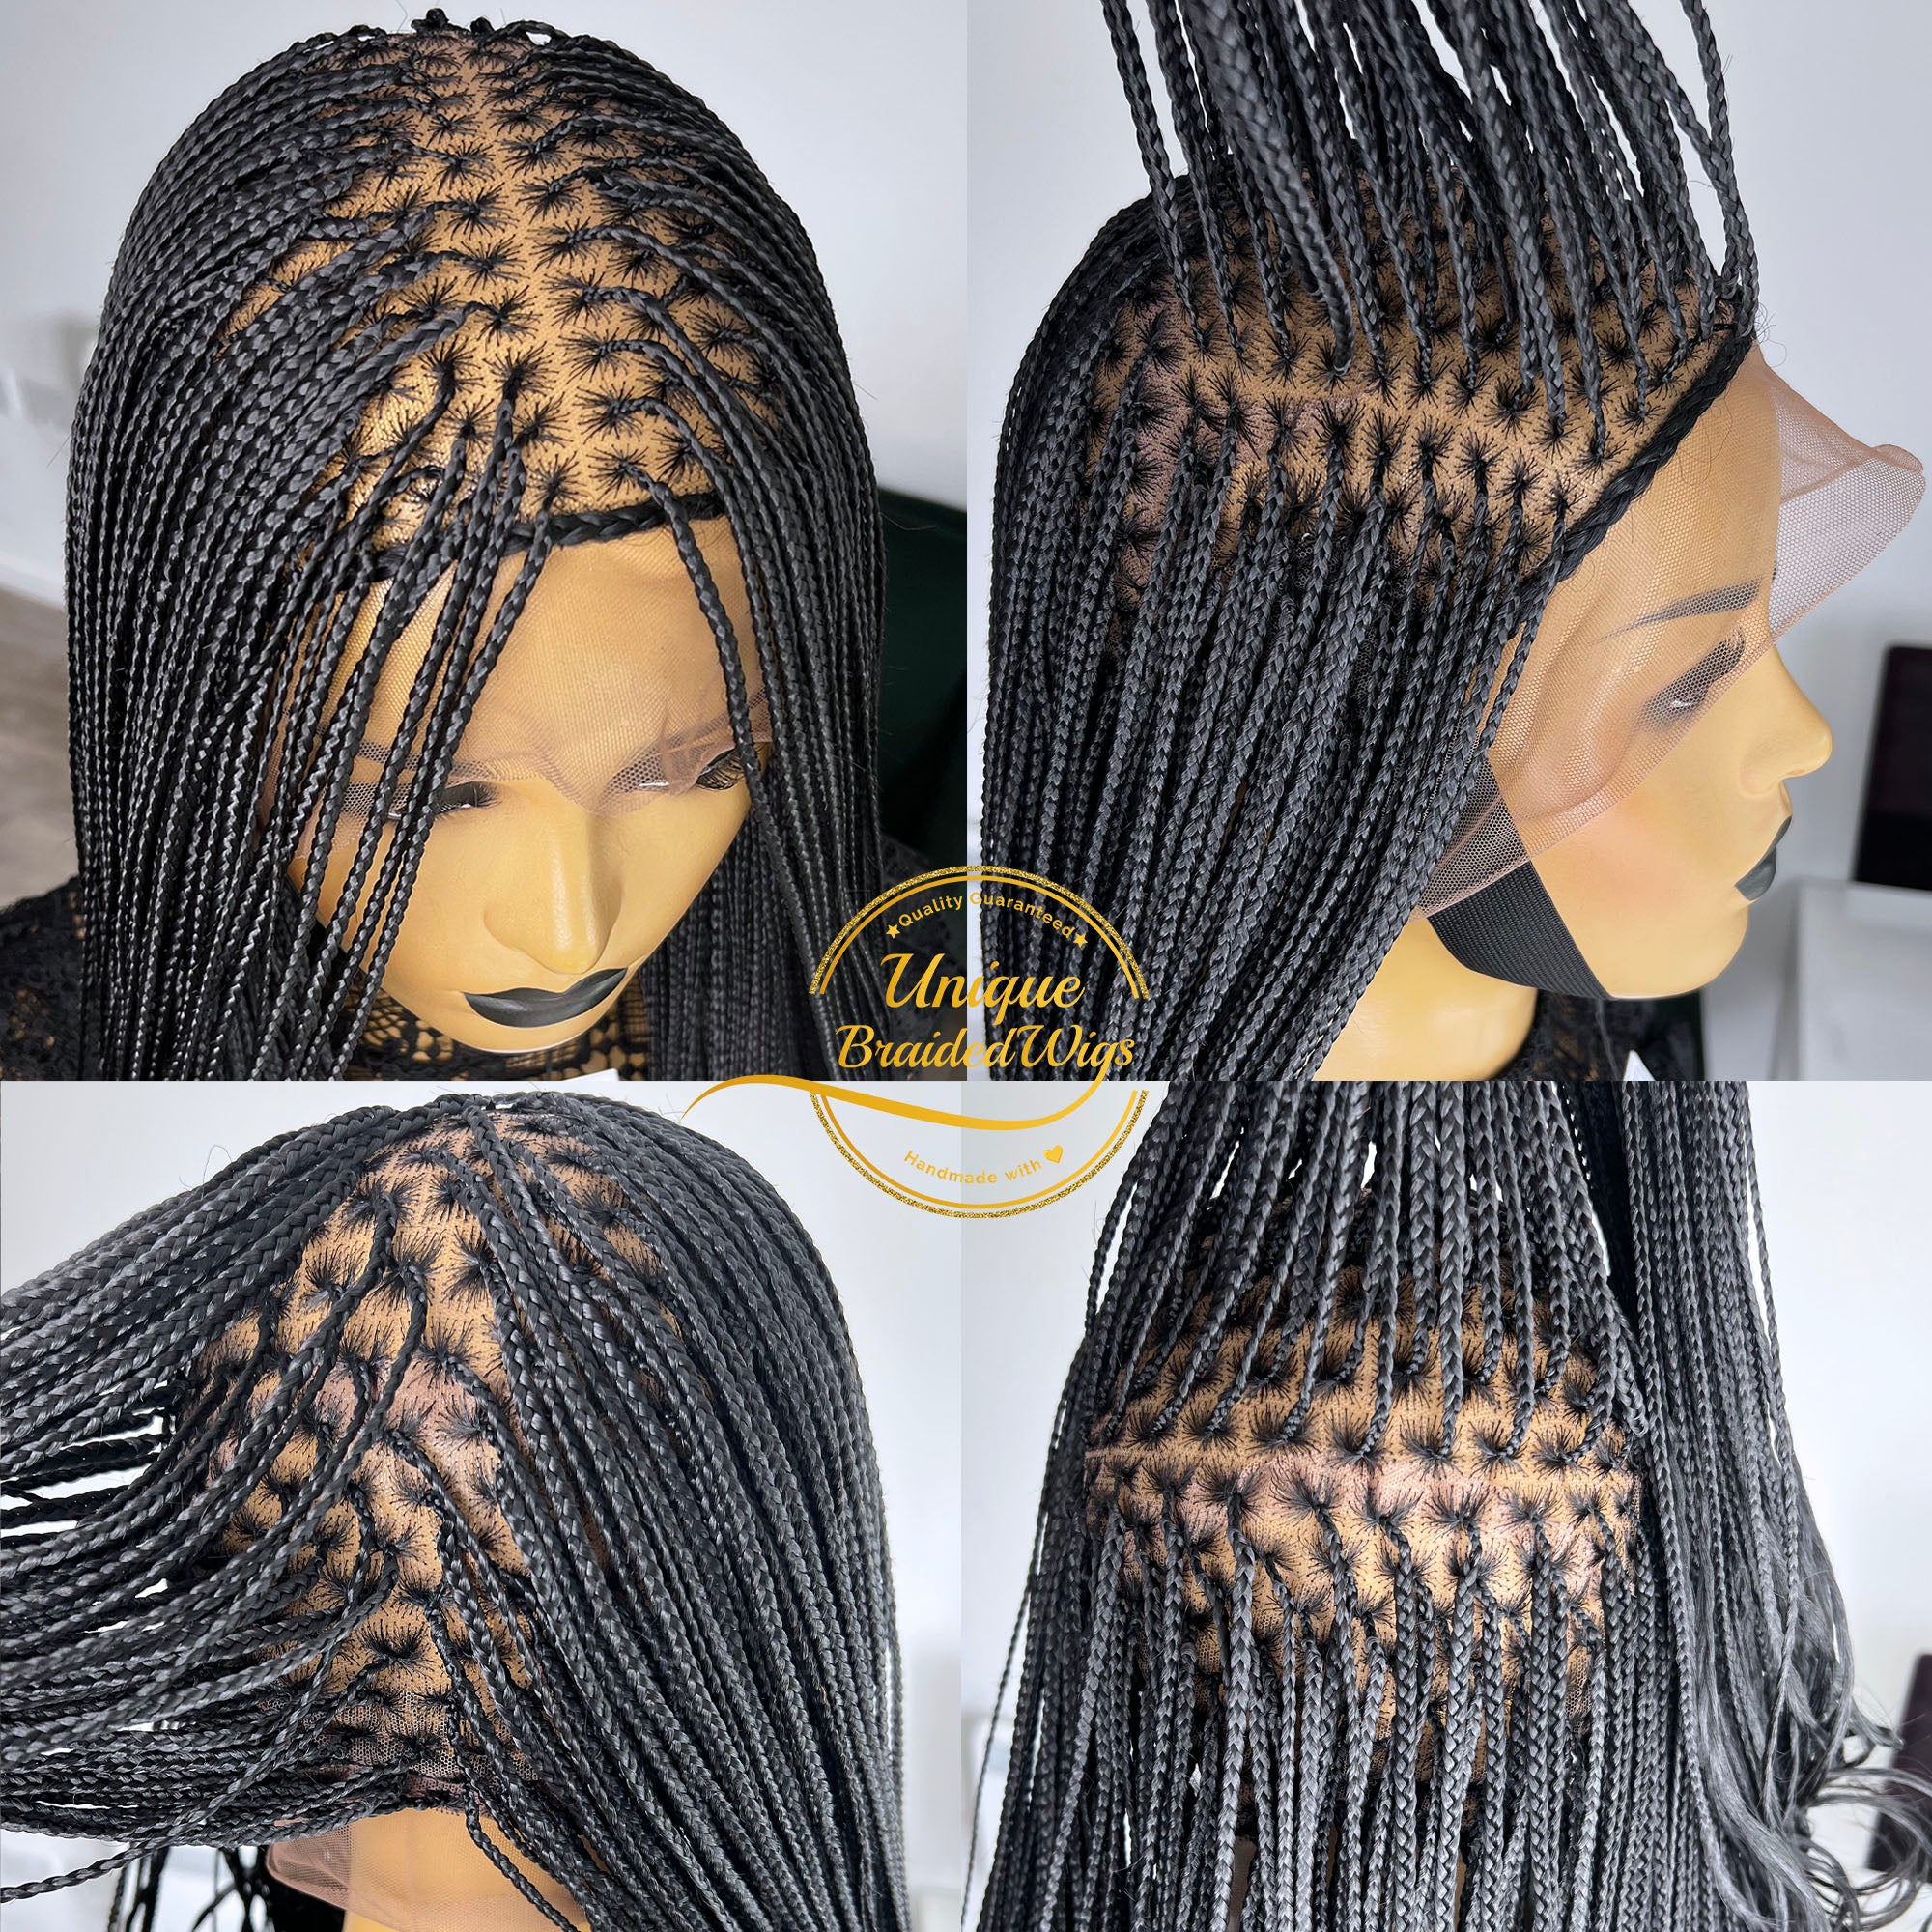 Braidedwig, Knotless Braids,braided Lace Wig for Black Women, Handmade Wig,  Teal Green Knotless Braids, Free Shipping, Full Lace Wig, Custom 